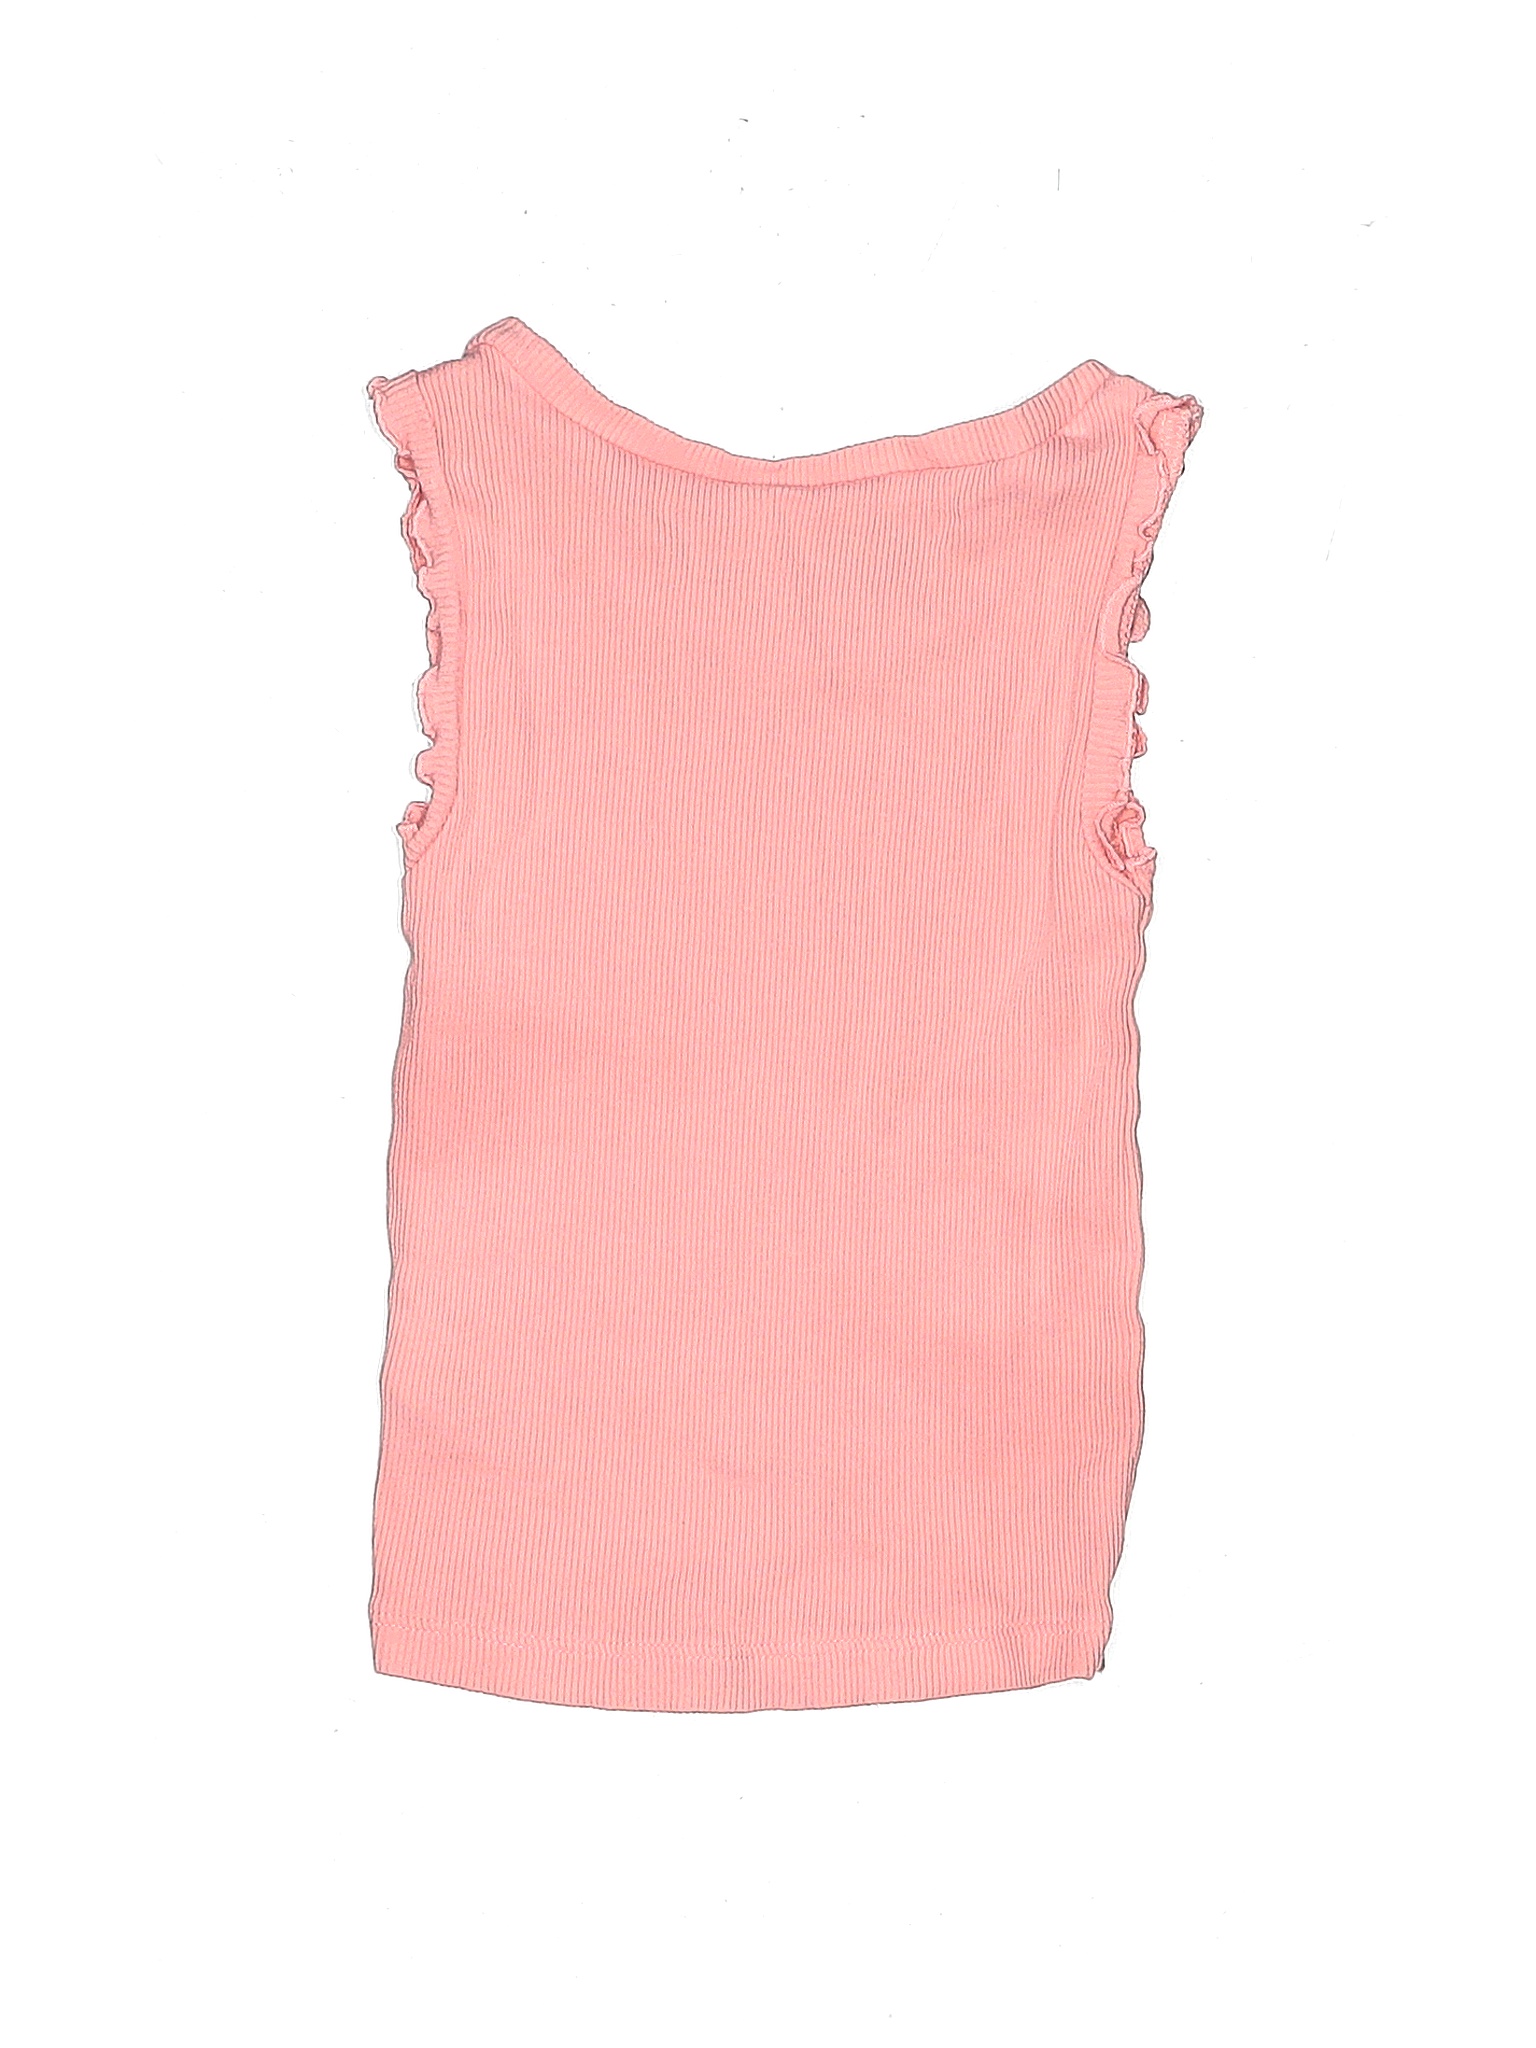 Details about   Carter's Pink Sleeveless Top 6 Months 